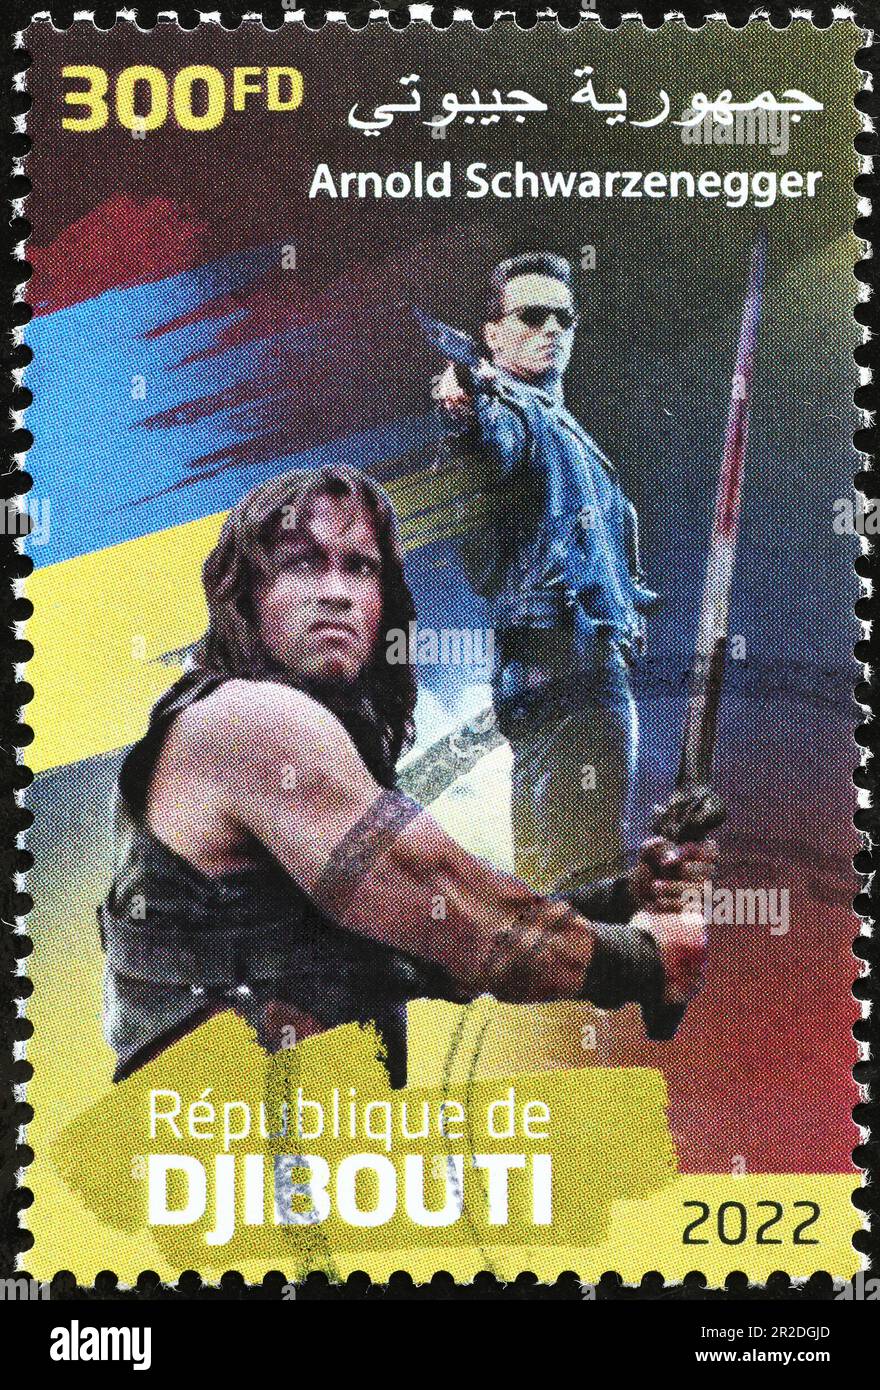 Arnold Schwarzenegger in his movies on postage stamp Stock Photo